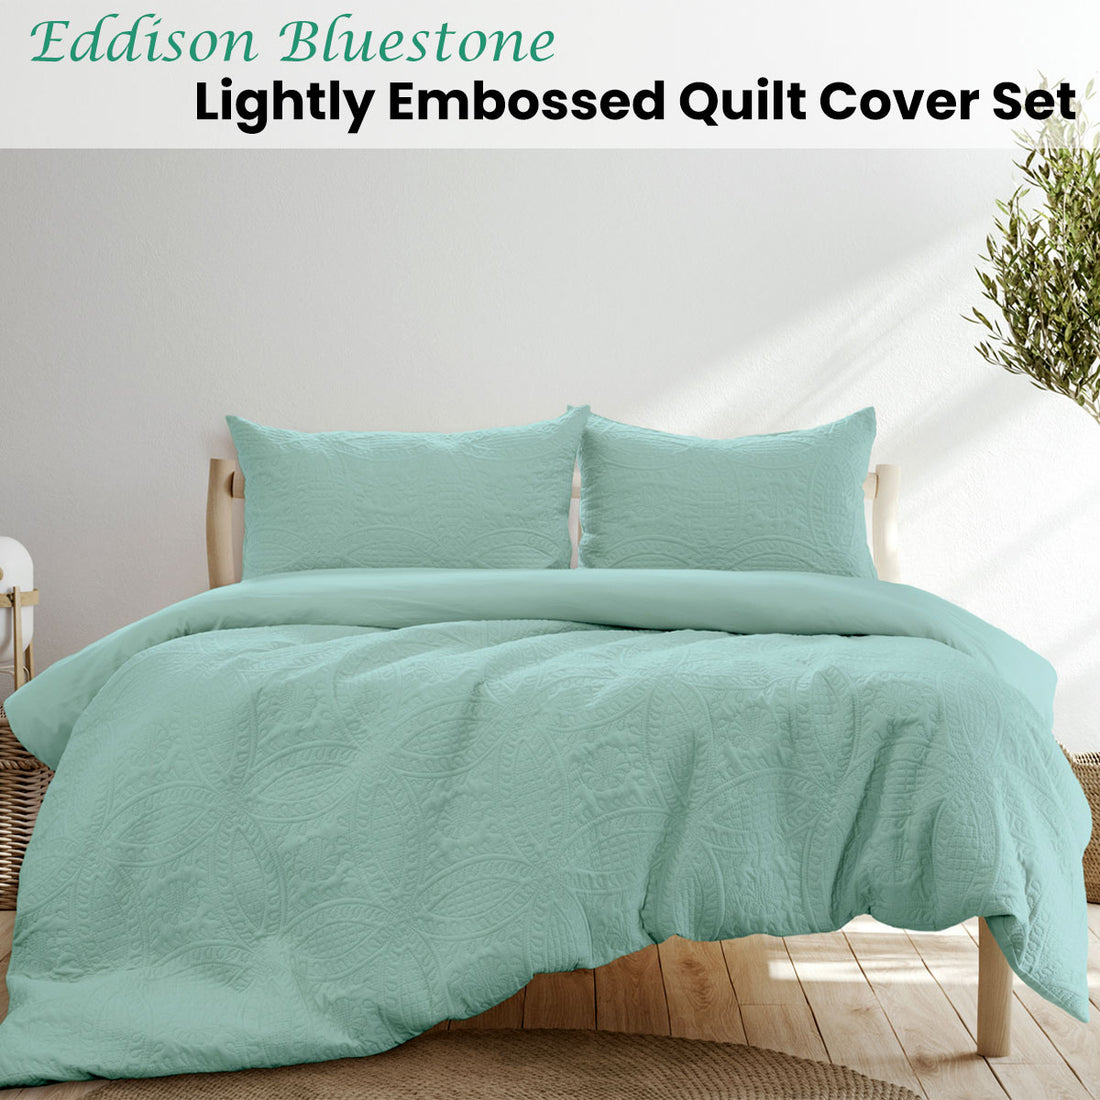 Ardor Eddison Bluestone Light Quilted Embossed Quilt Cover Set King-Home &amp; Garden &gt; Bedding-PEROZ Accessories